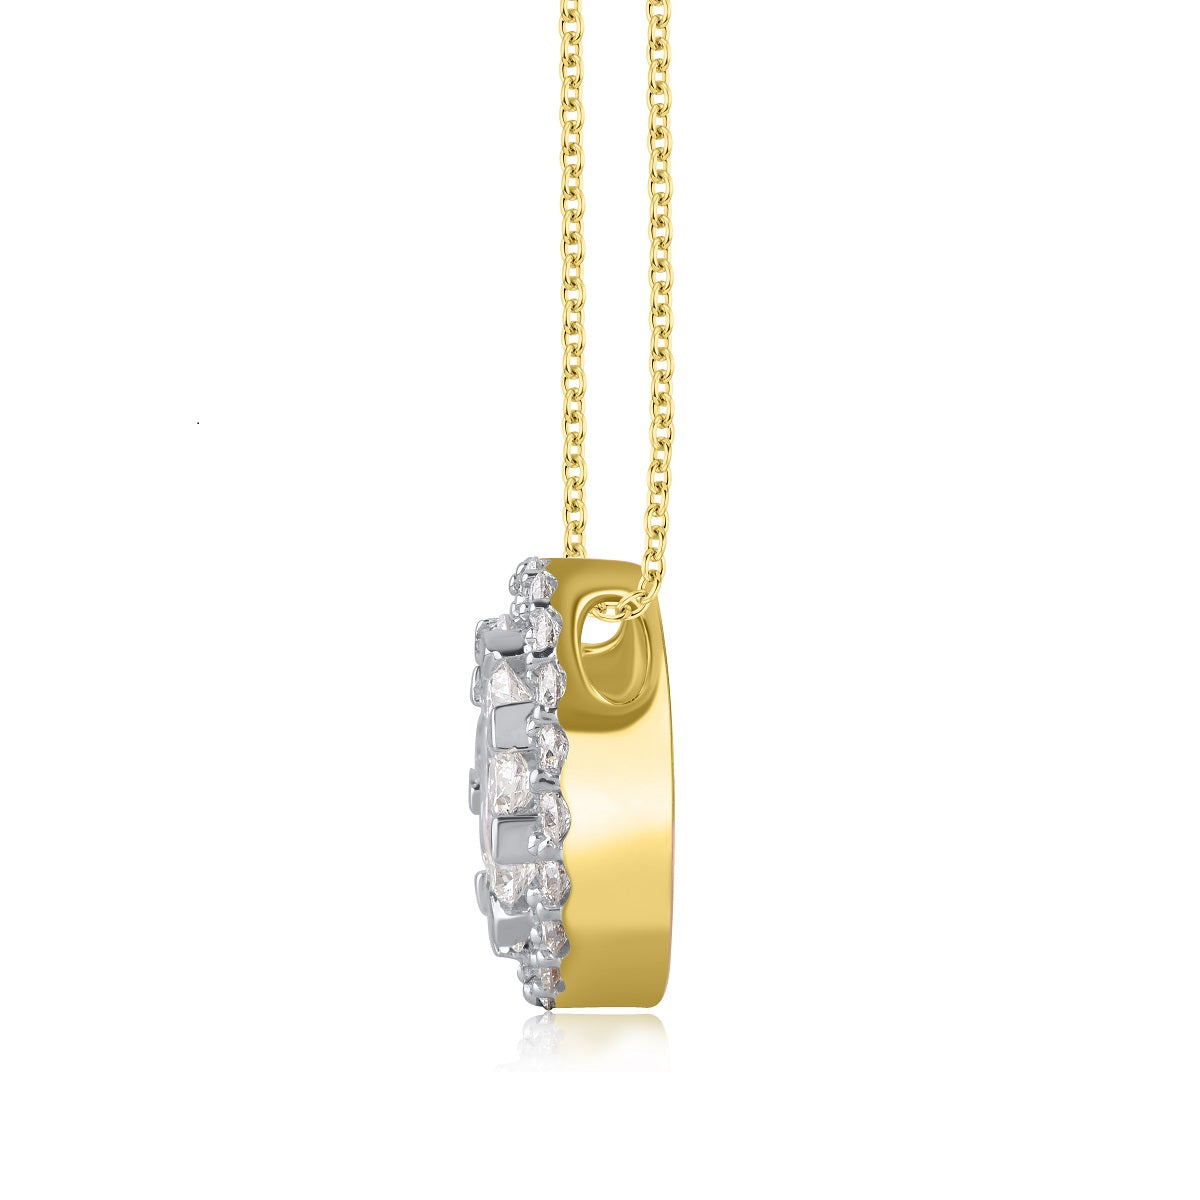 Cluster Pendant Necklace in 18K Gold